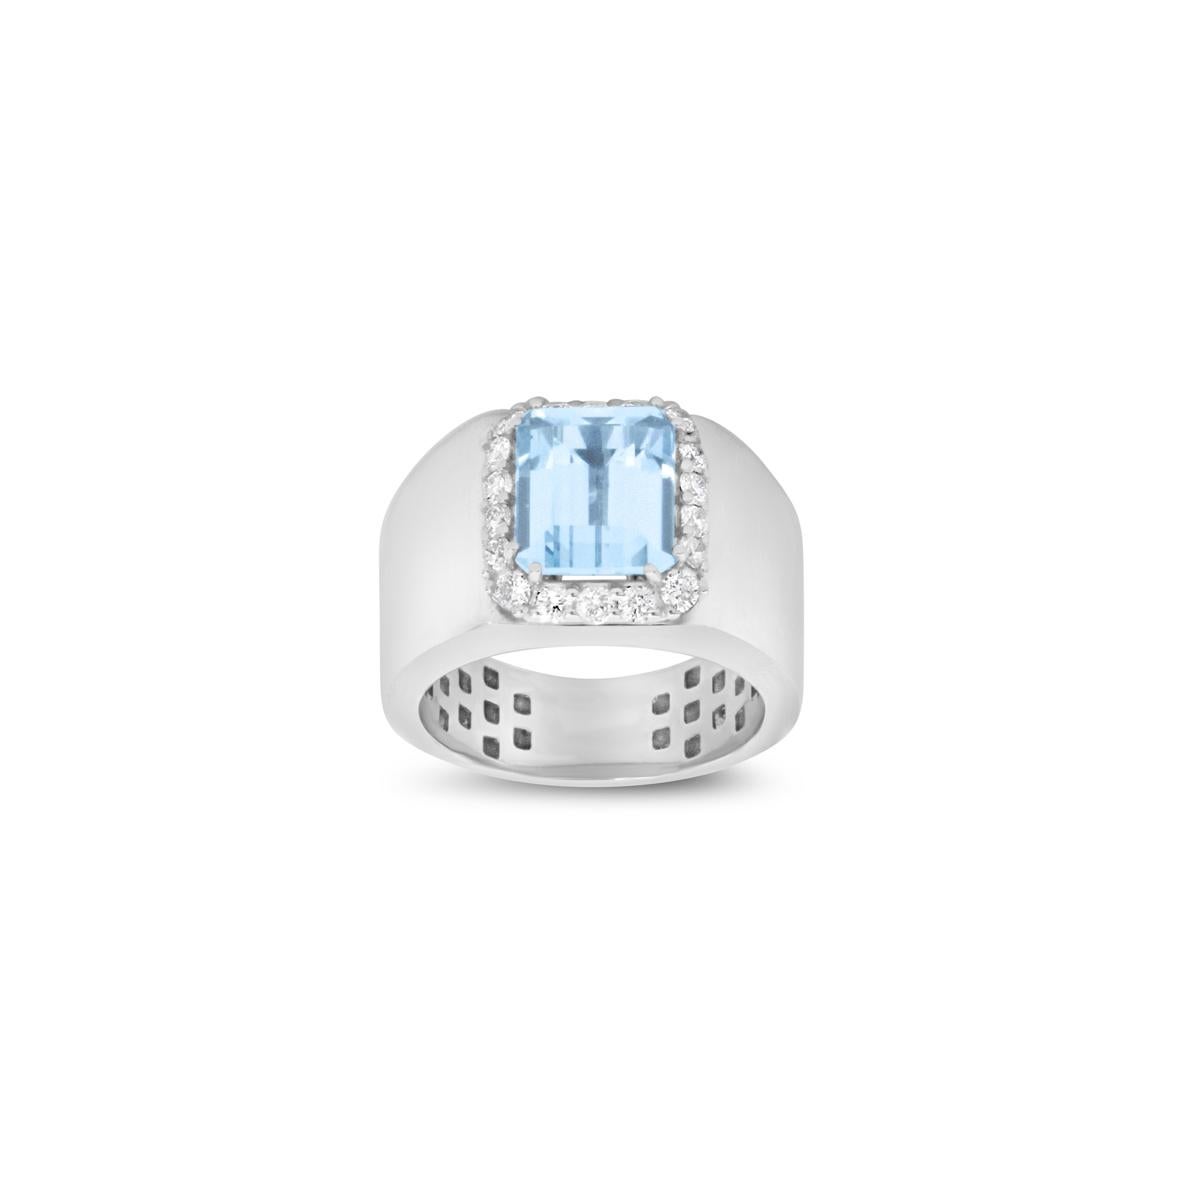 Discover the epitome of elegance and luxury with our exquisite 18kt White Gold Aquamarine Ring. Handcrafted in Italy, this ring marries the timeless allure of aquamarine with the brilliance of diamonds, resulting in a stunning masterpiece that will